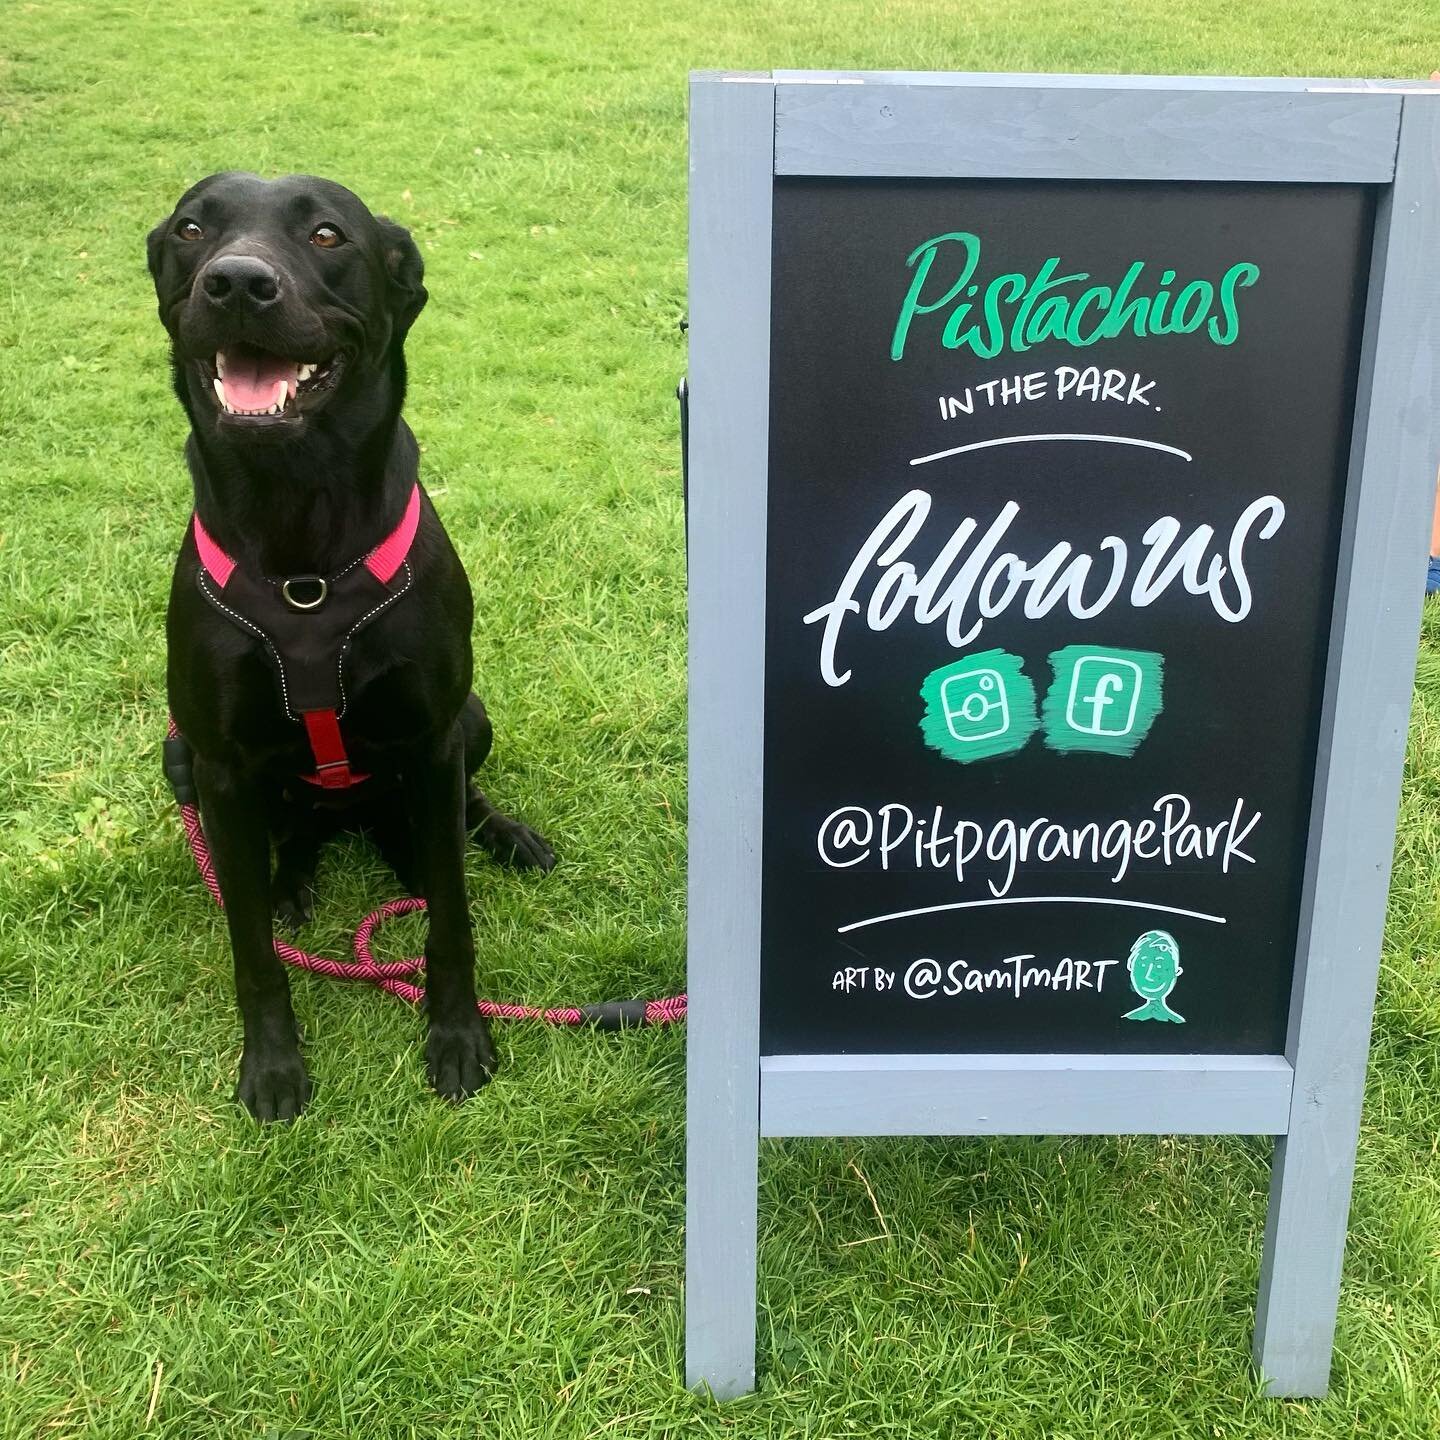 Woof ft. Jess @pitpgrangepark 🥰💖✨#chalkboardart #signage #aboard #signwriting #artdaily #supportlocal #pistachios #pets #park #sunshine #doggo #cafe #local